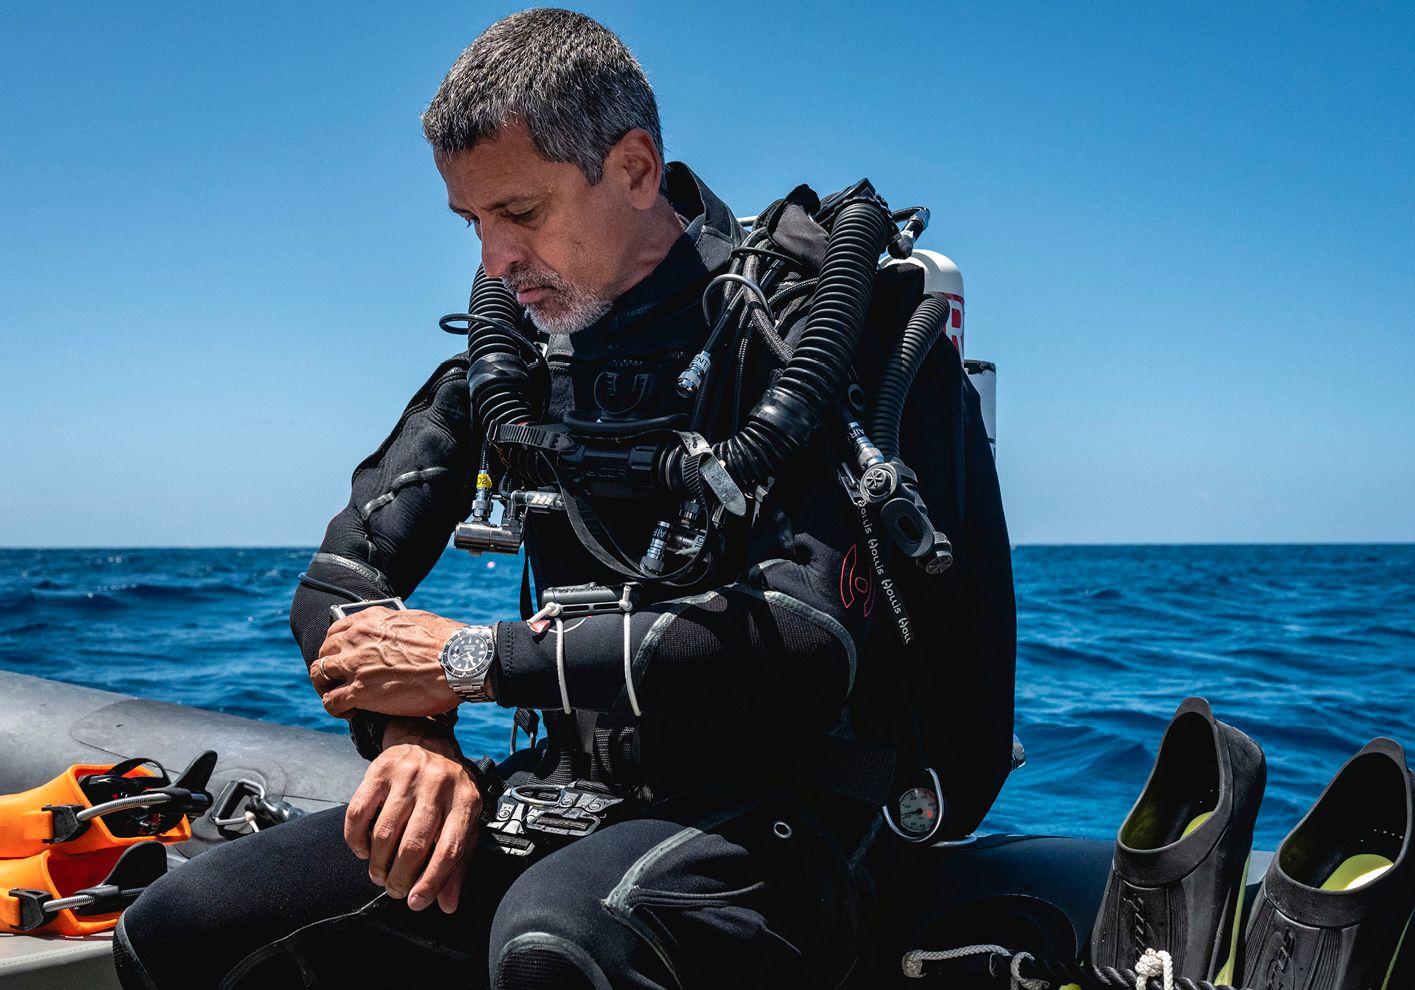 Diver Luiz Rocha is a Professor at the California Academy of Sciences, and a 2021 Rolex Awards for Enterprise Laureate